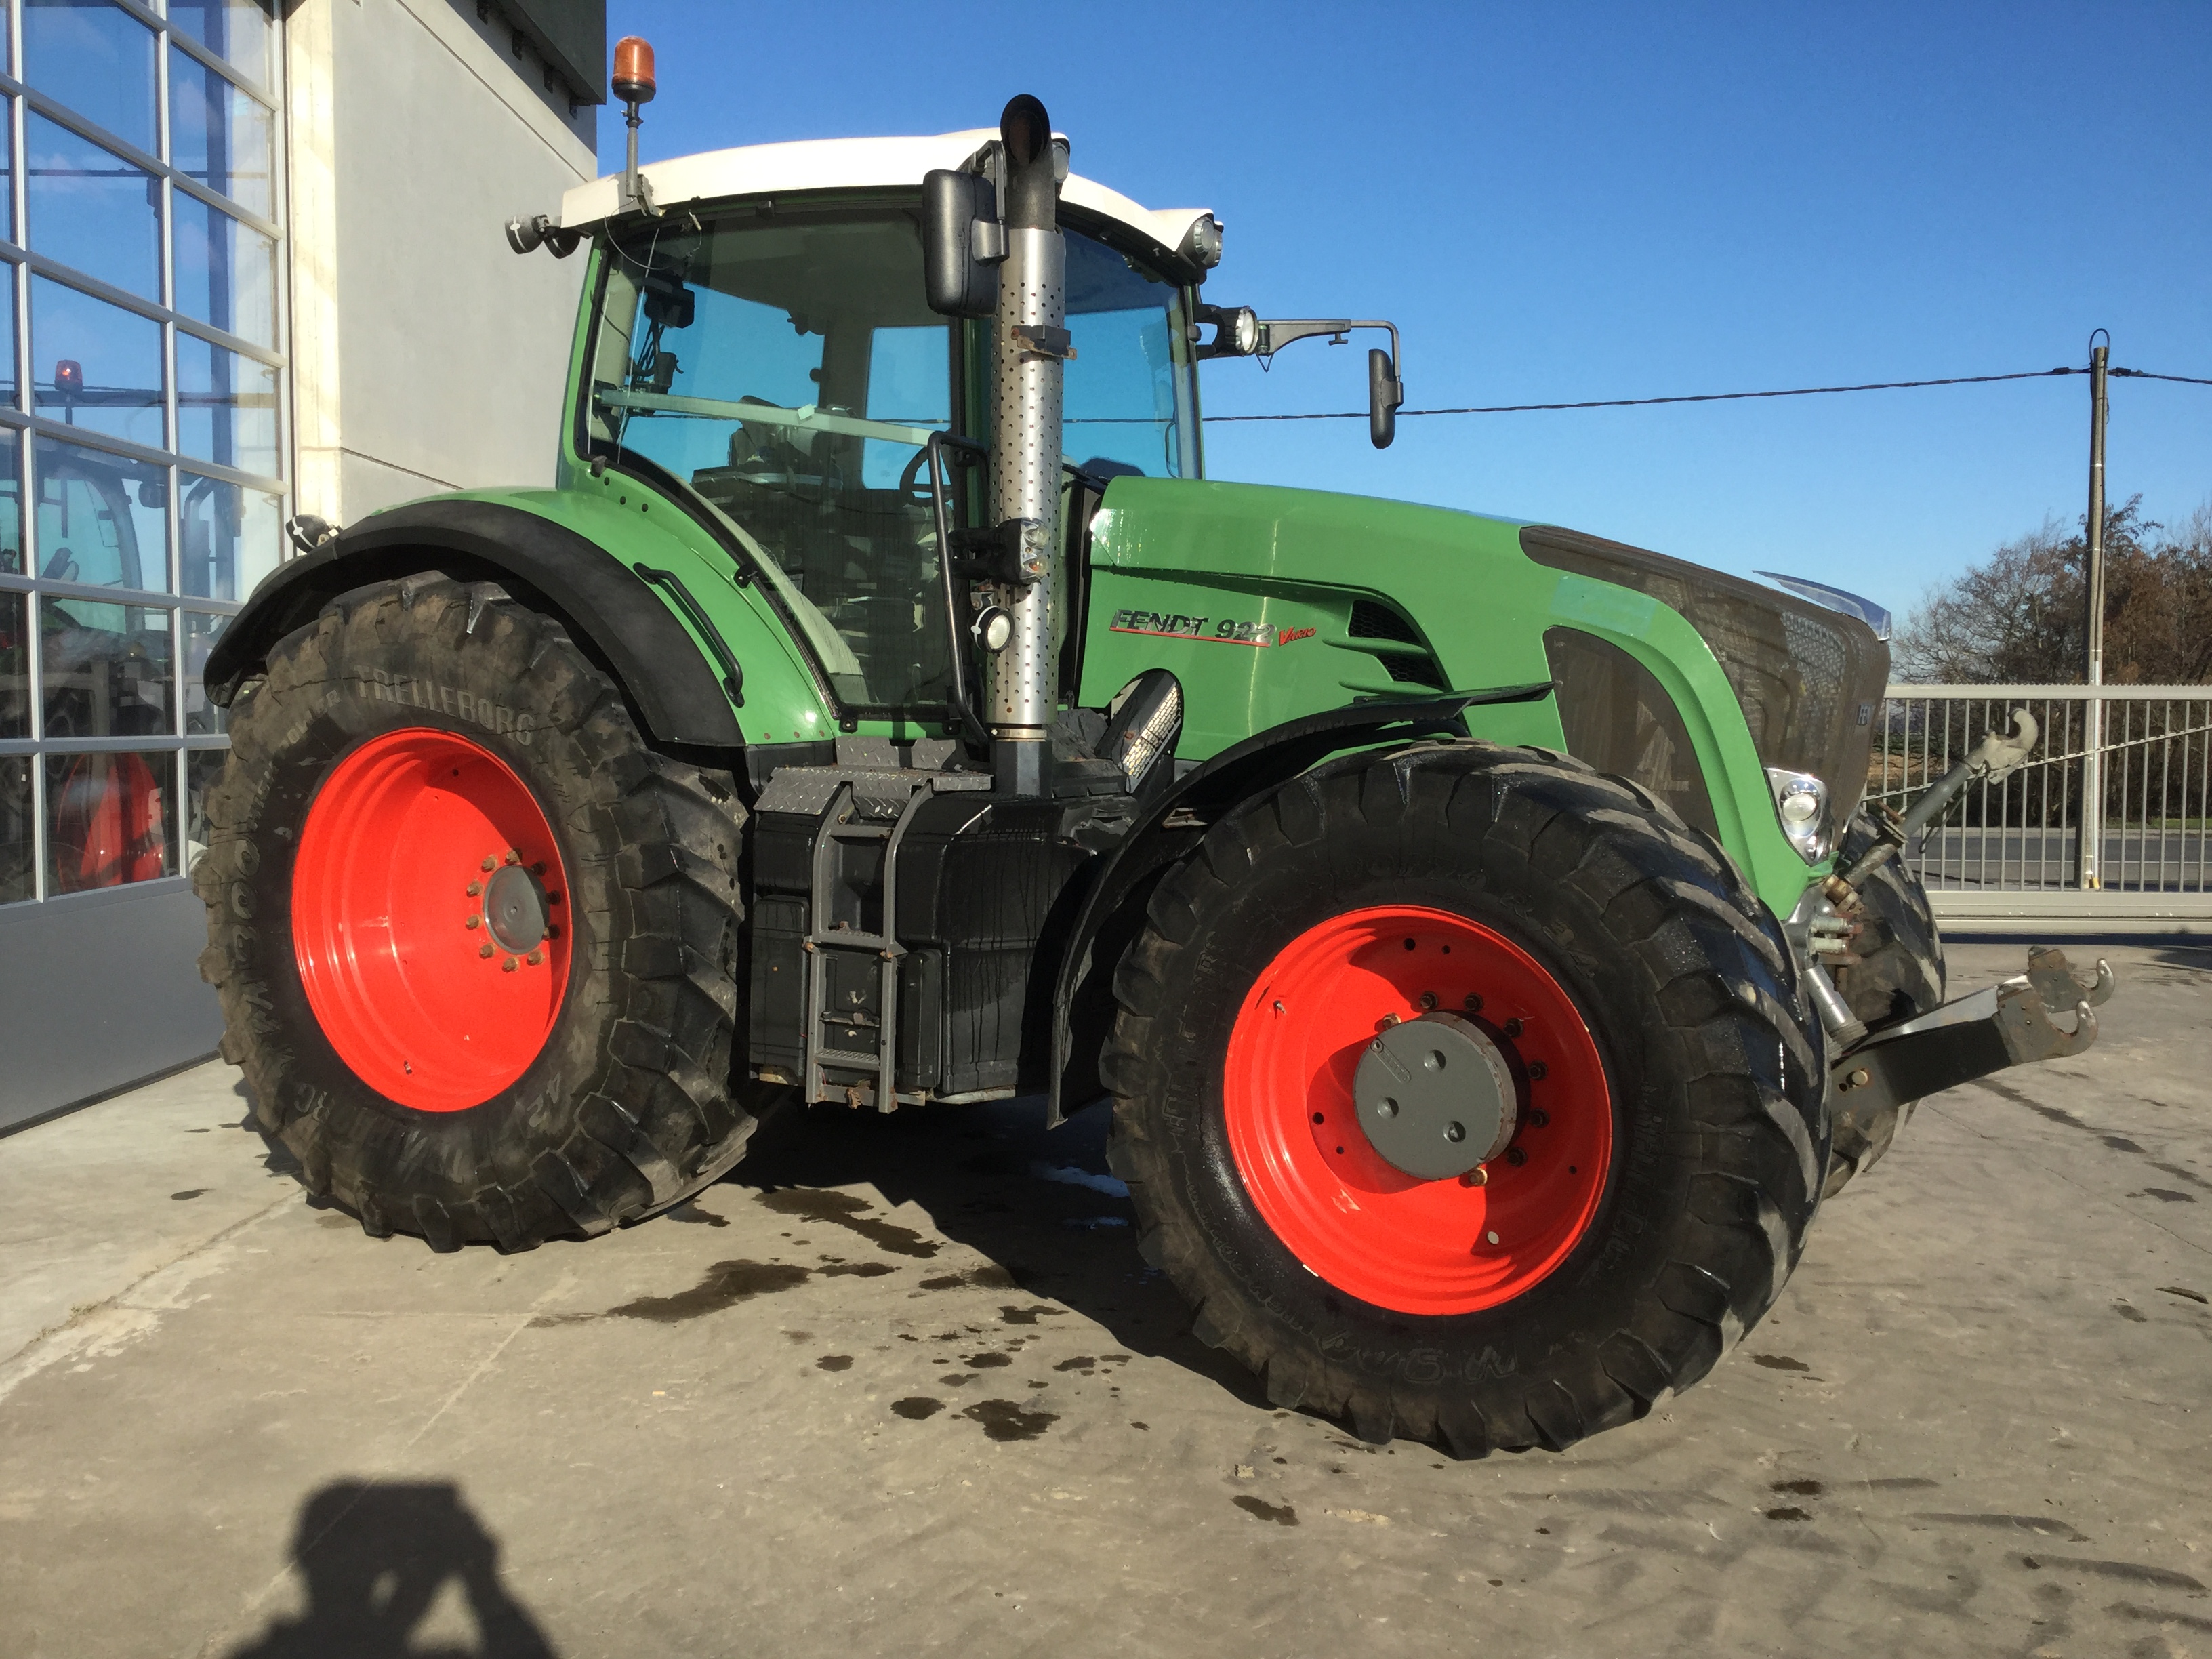 Used Fendt 922 VARIO tractors Year: 2007 for sale - Mascus USA